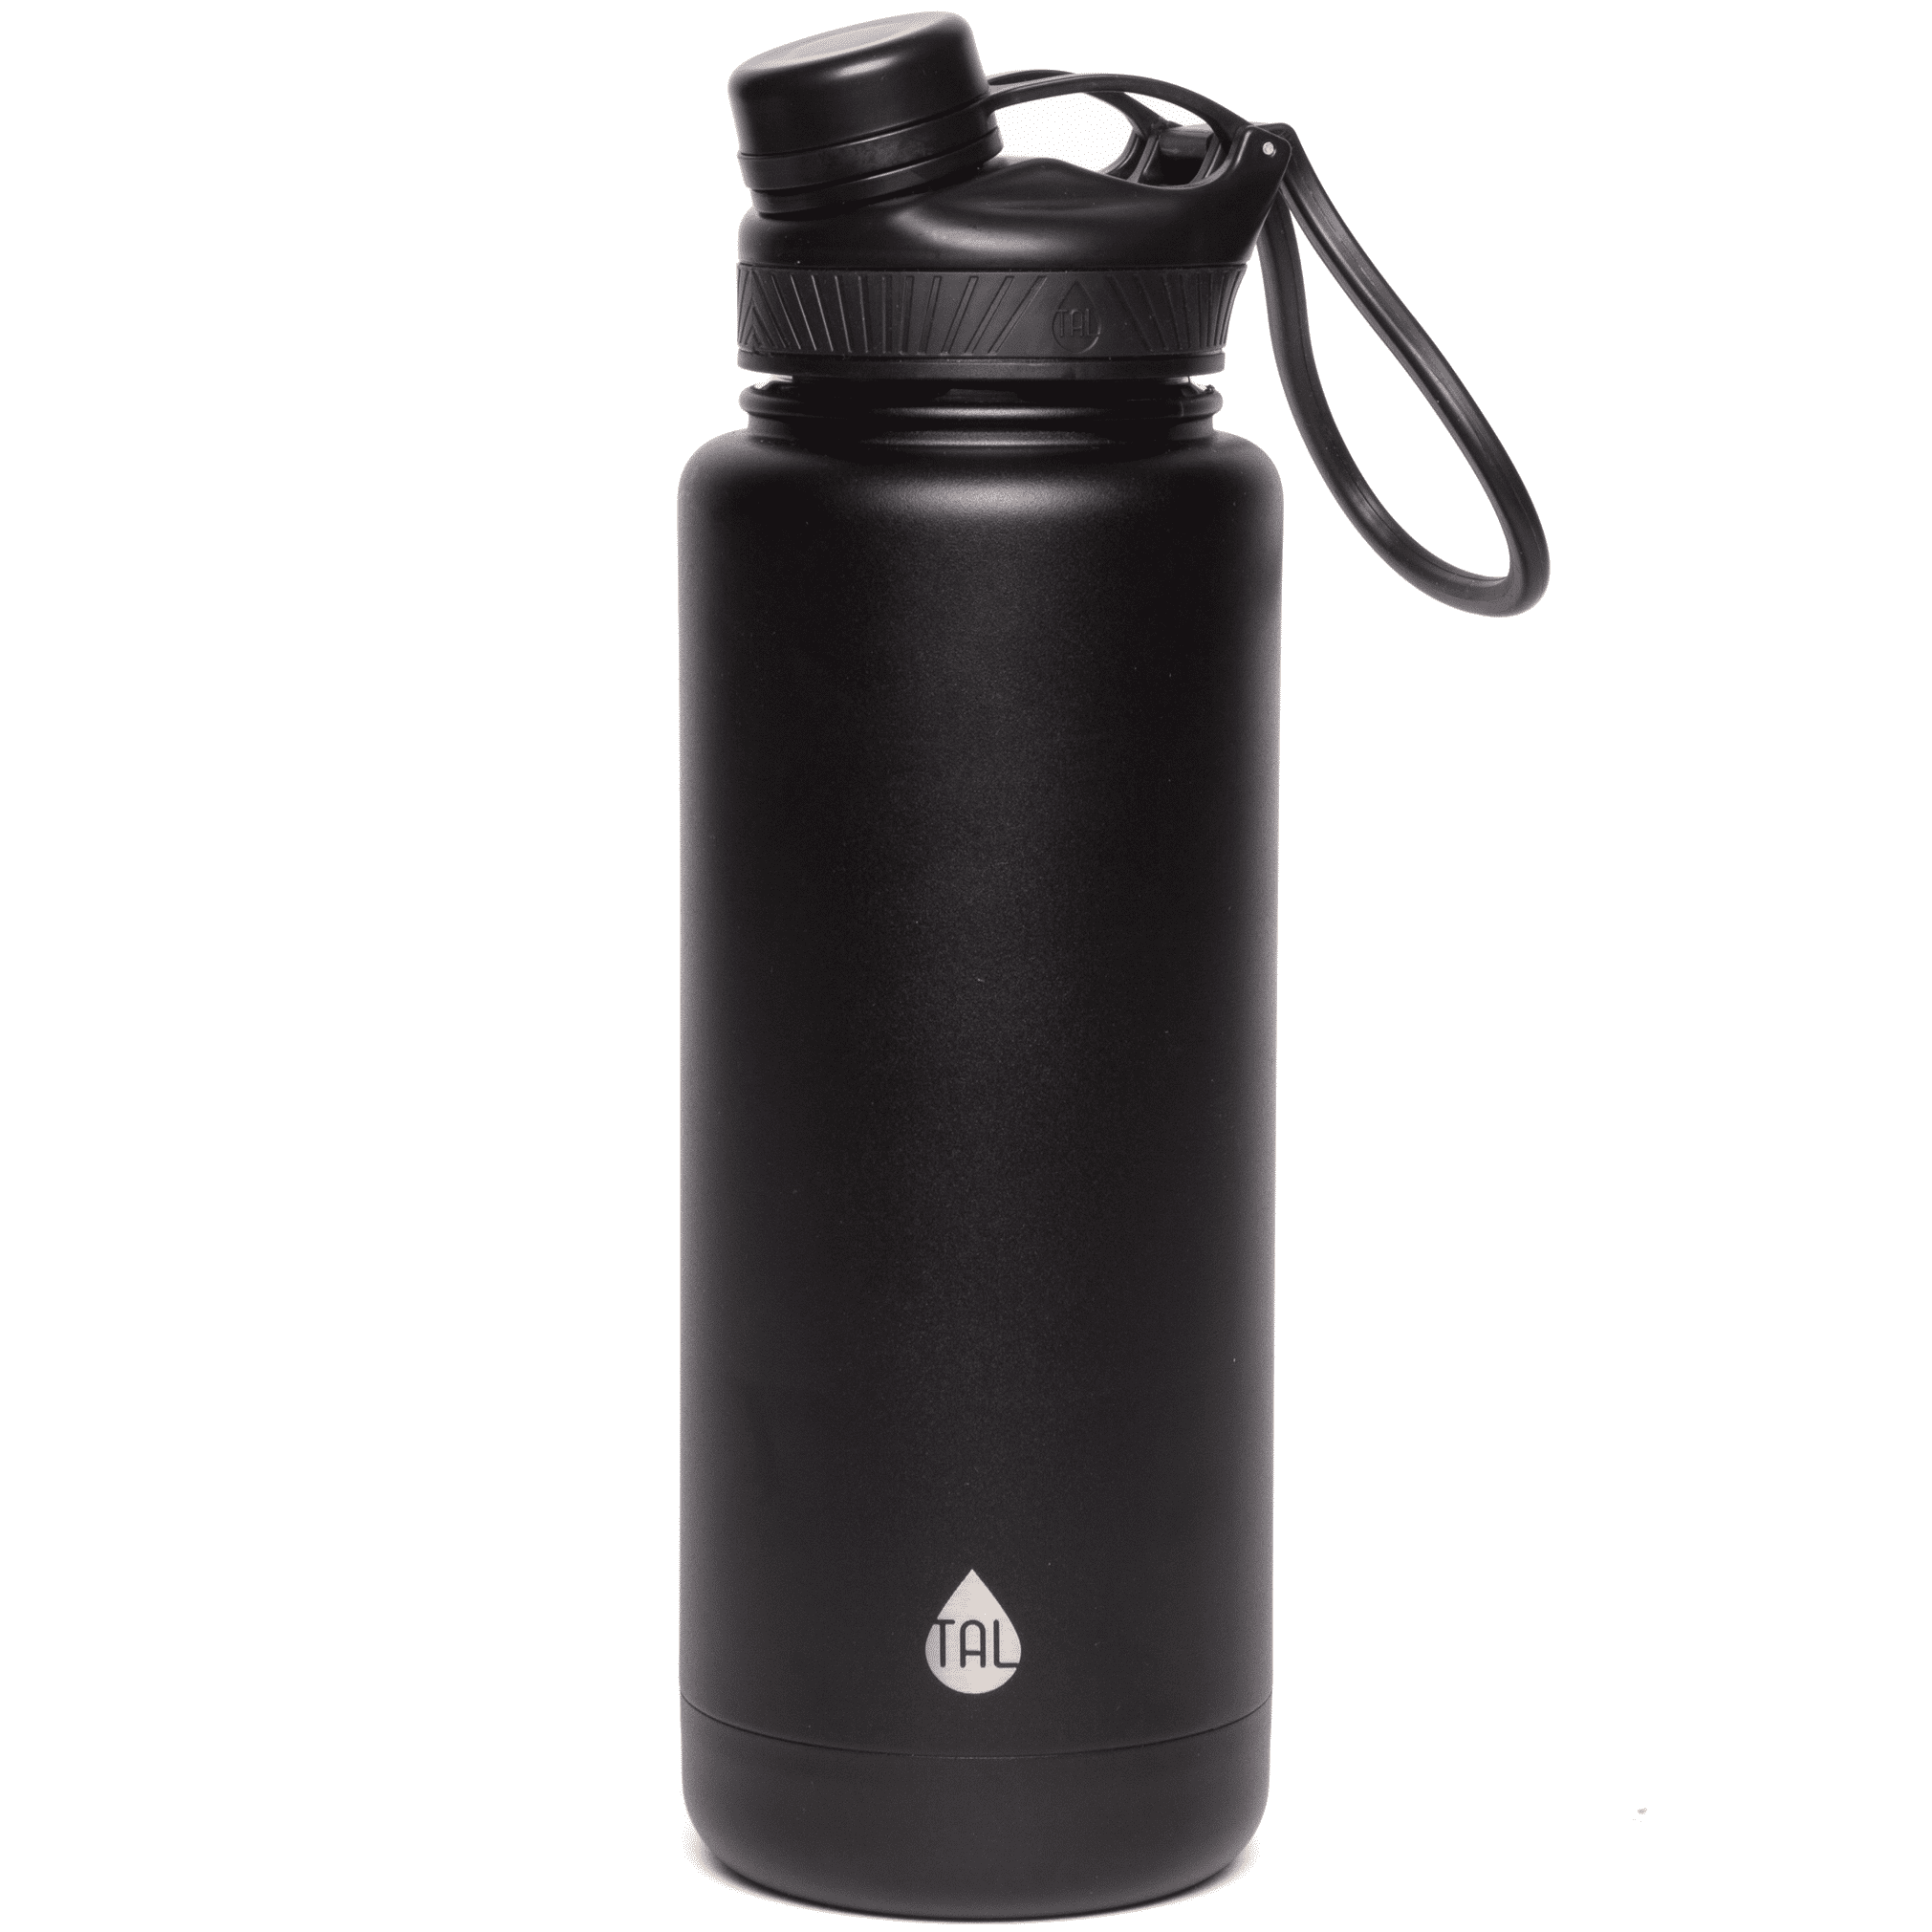 Tal Ranger Bottle Replacement Lid - Best Pictures and Decription Tal Stainless Steel Water Bottle Replacement Lid